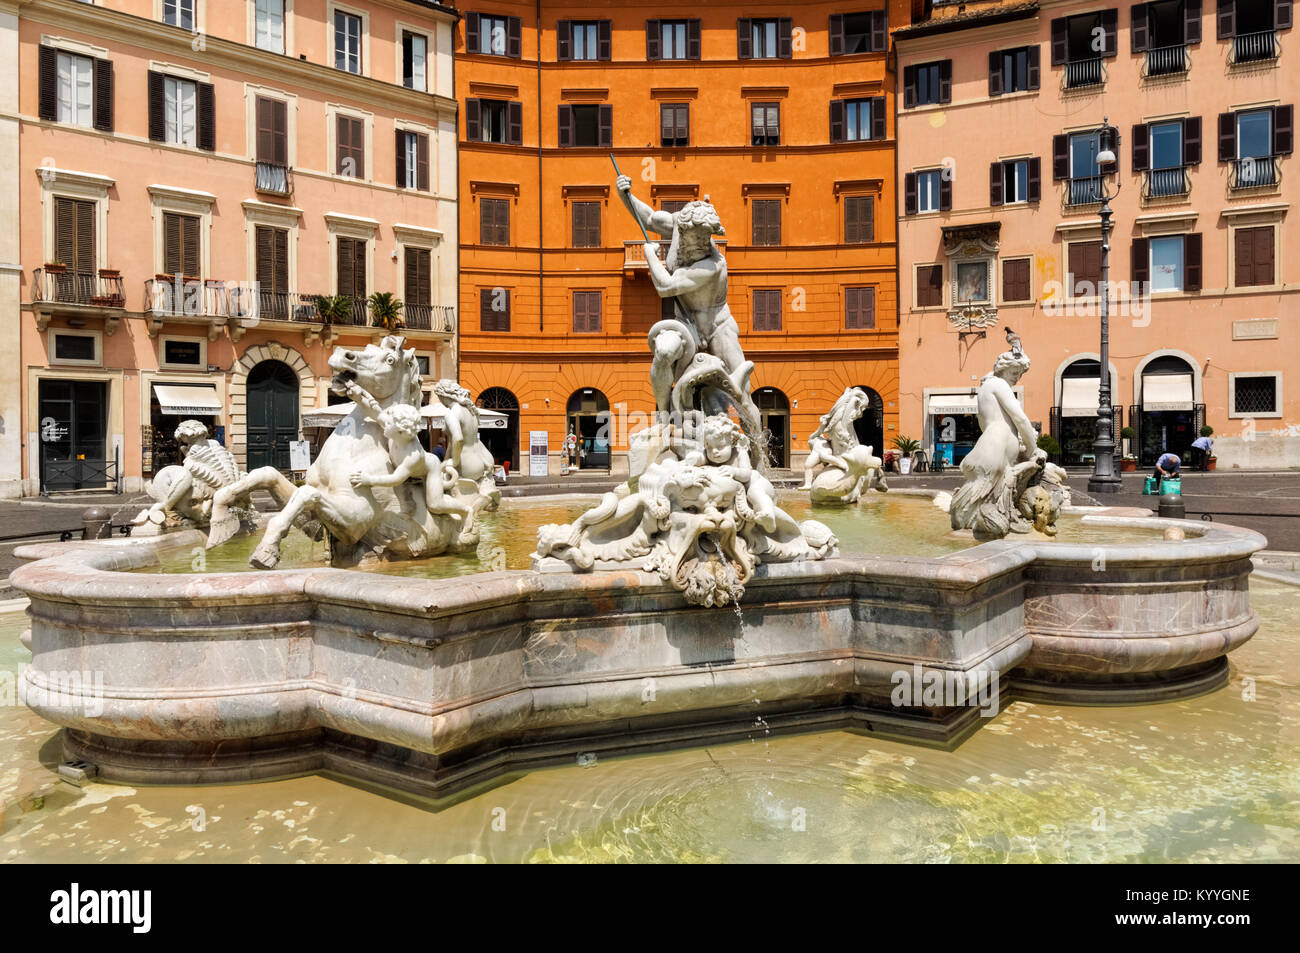 The Fountain of Neptune in the Piazza Navona, Rome, Italy Stock Photo